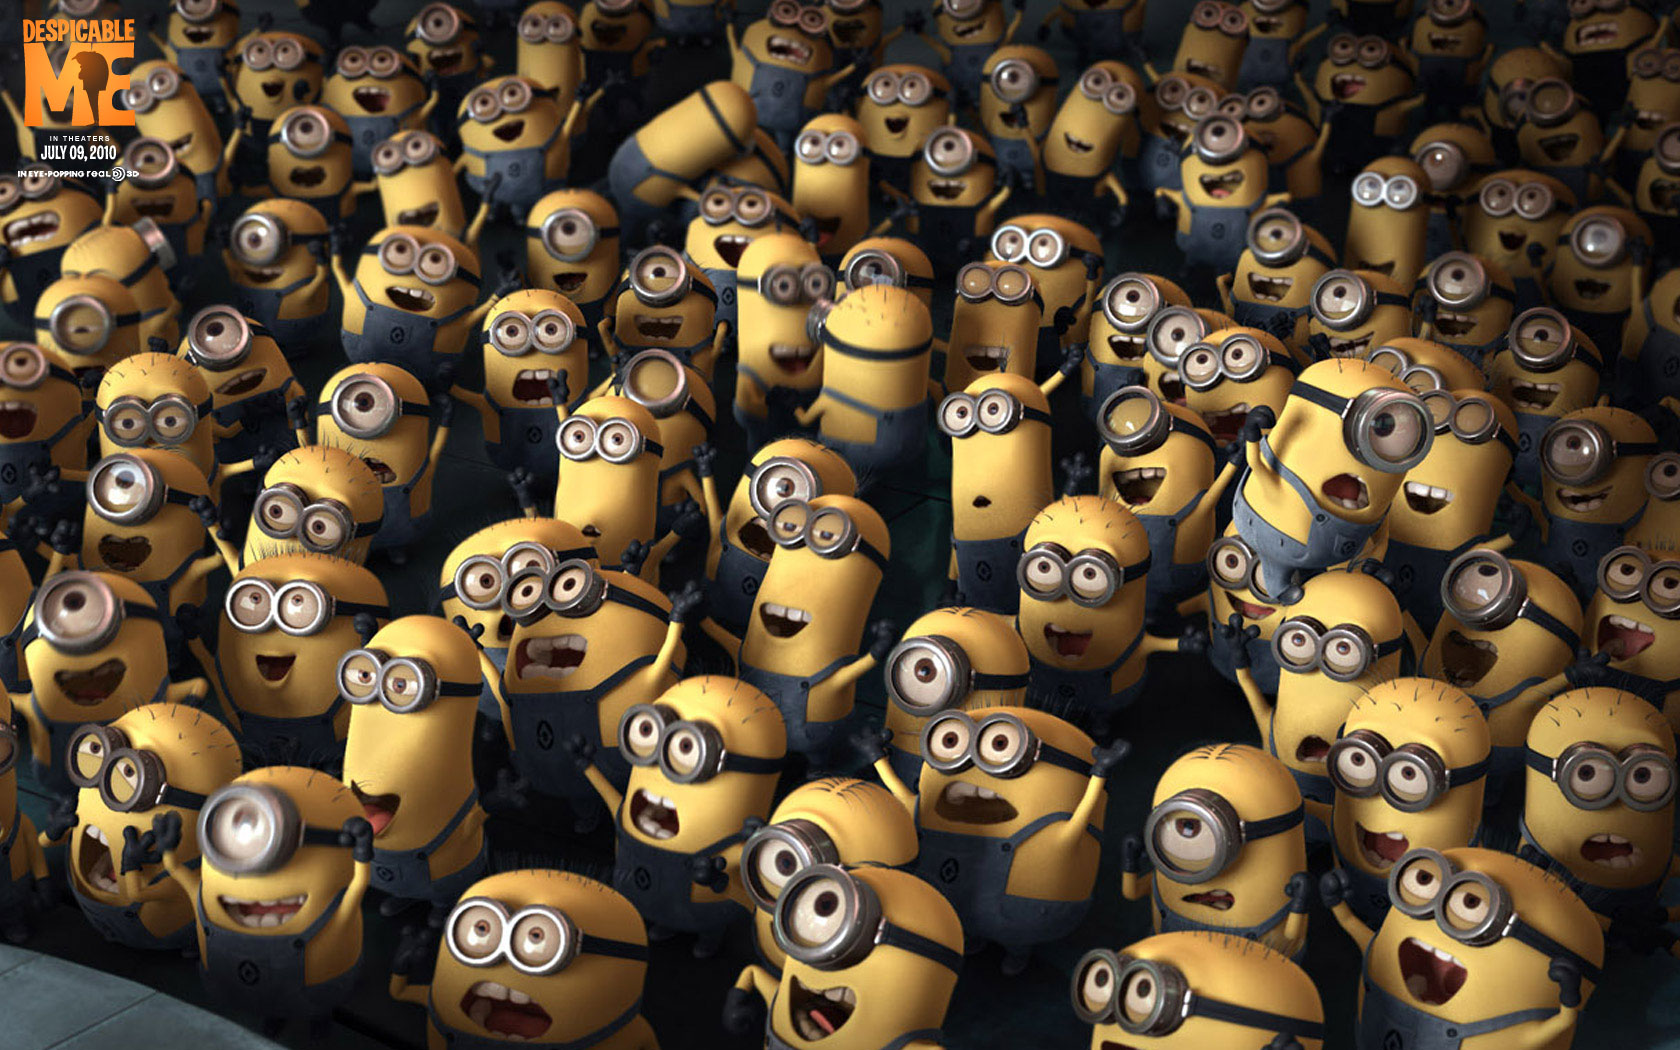 ɵҡdespicable me(ֽ7)